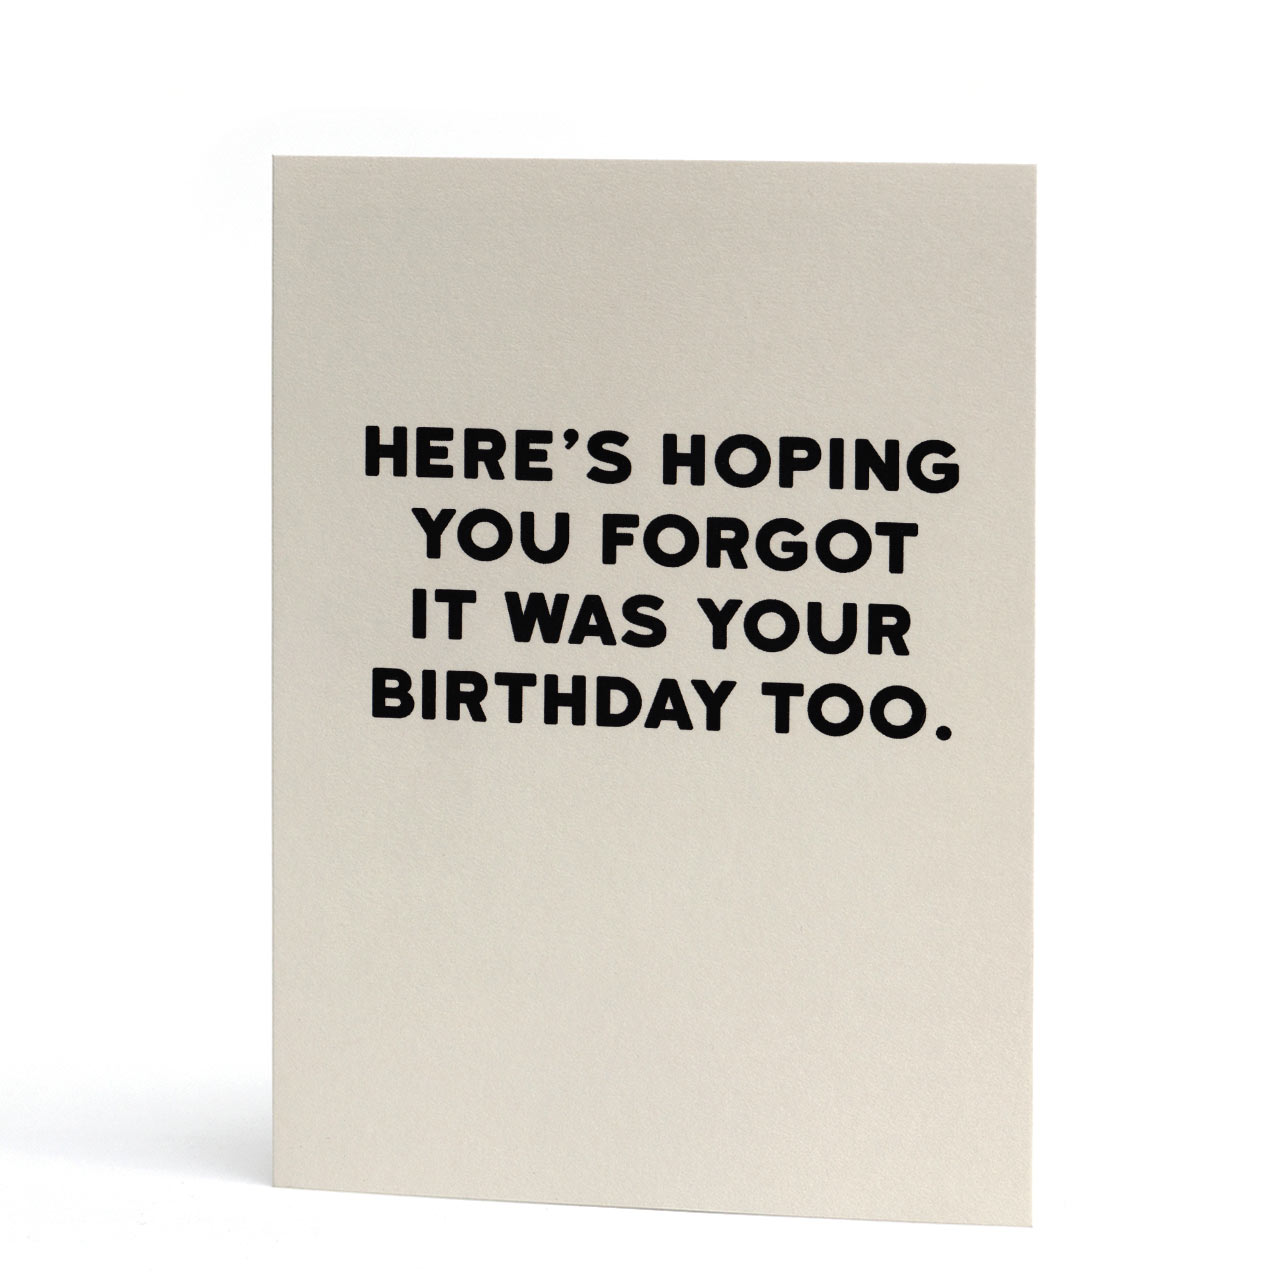 Hoping You Forgot Belated Birthday Card